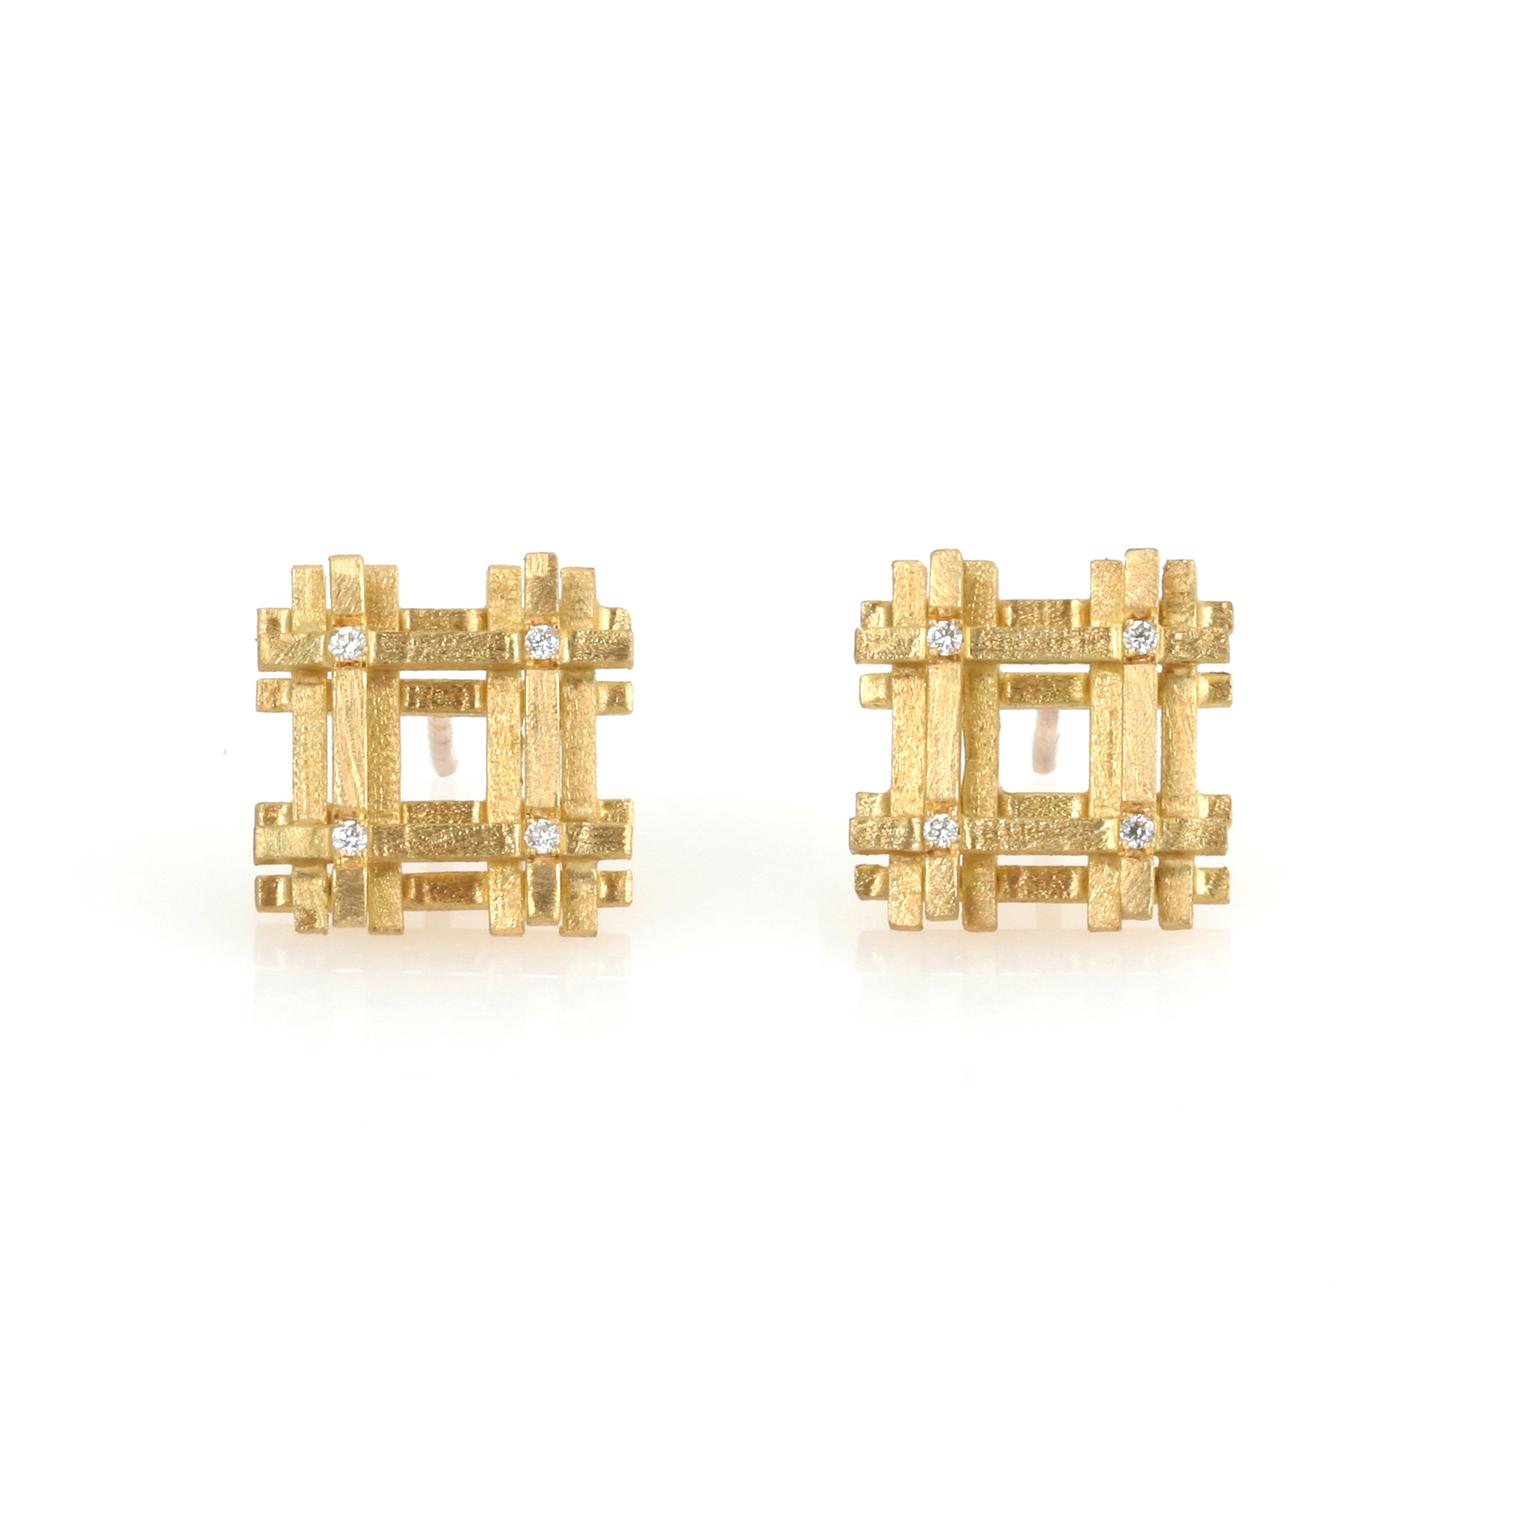 Shimell and Madden diamond earrings